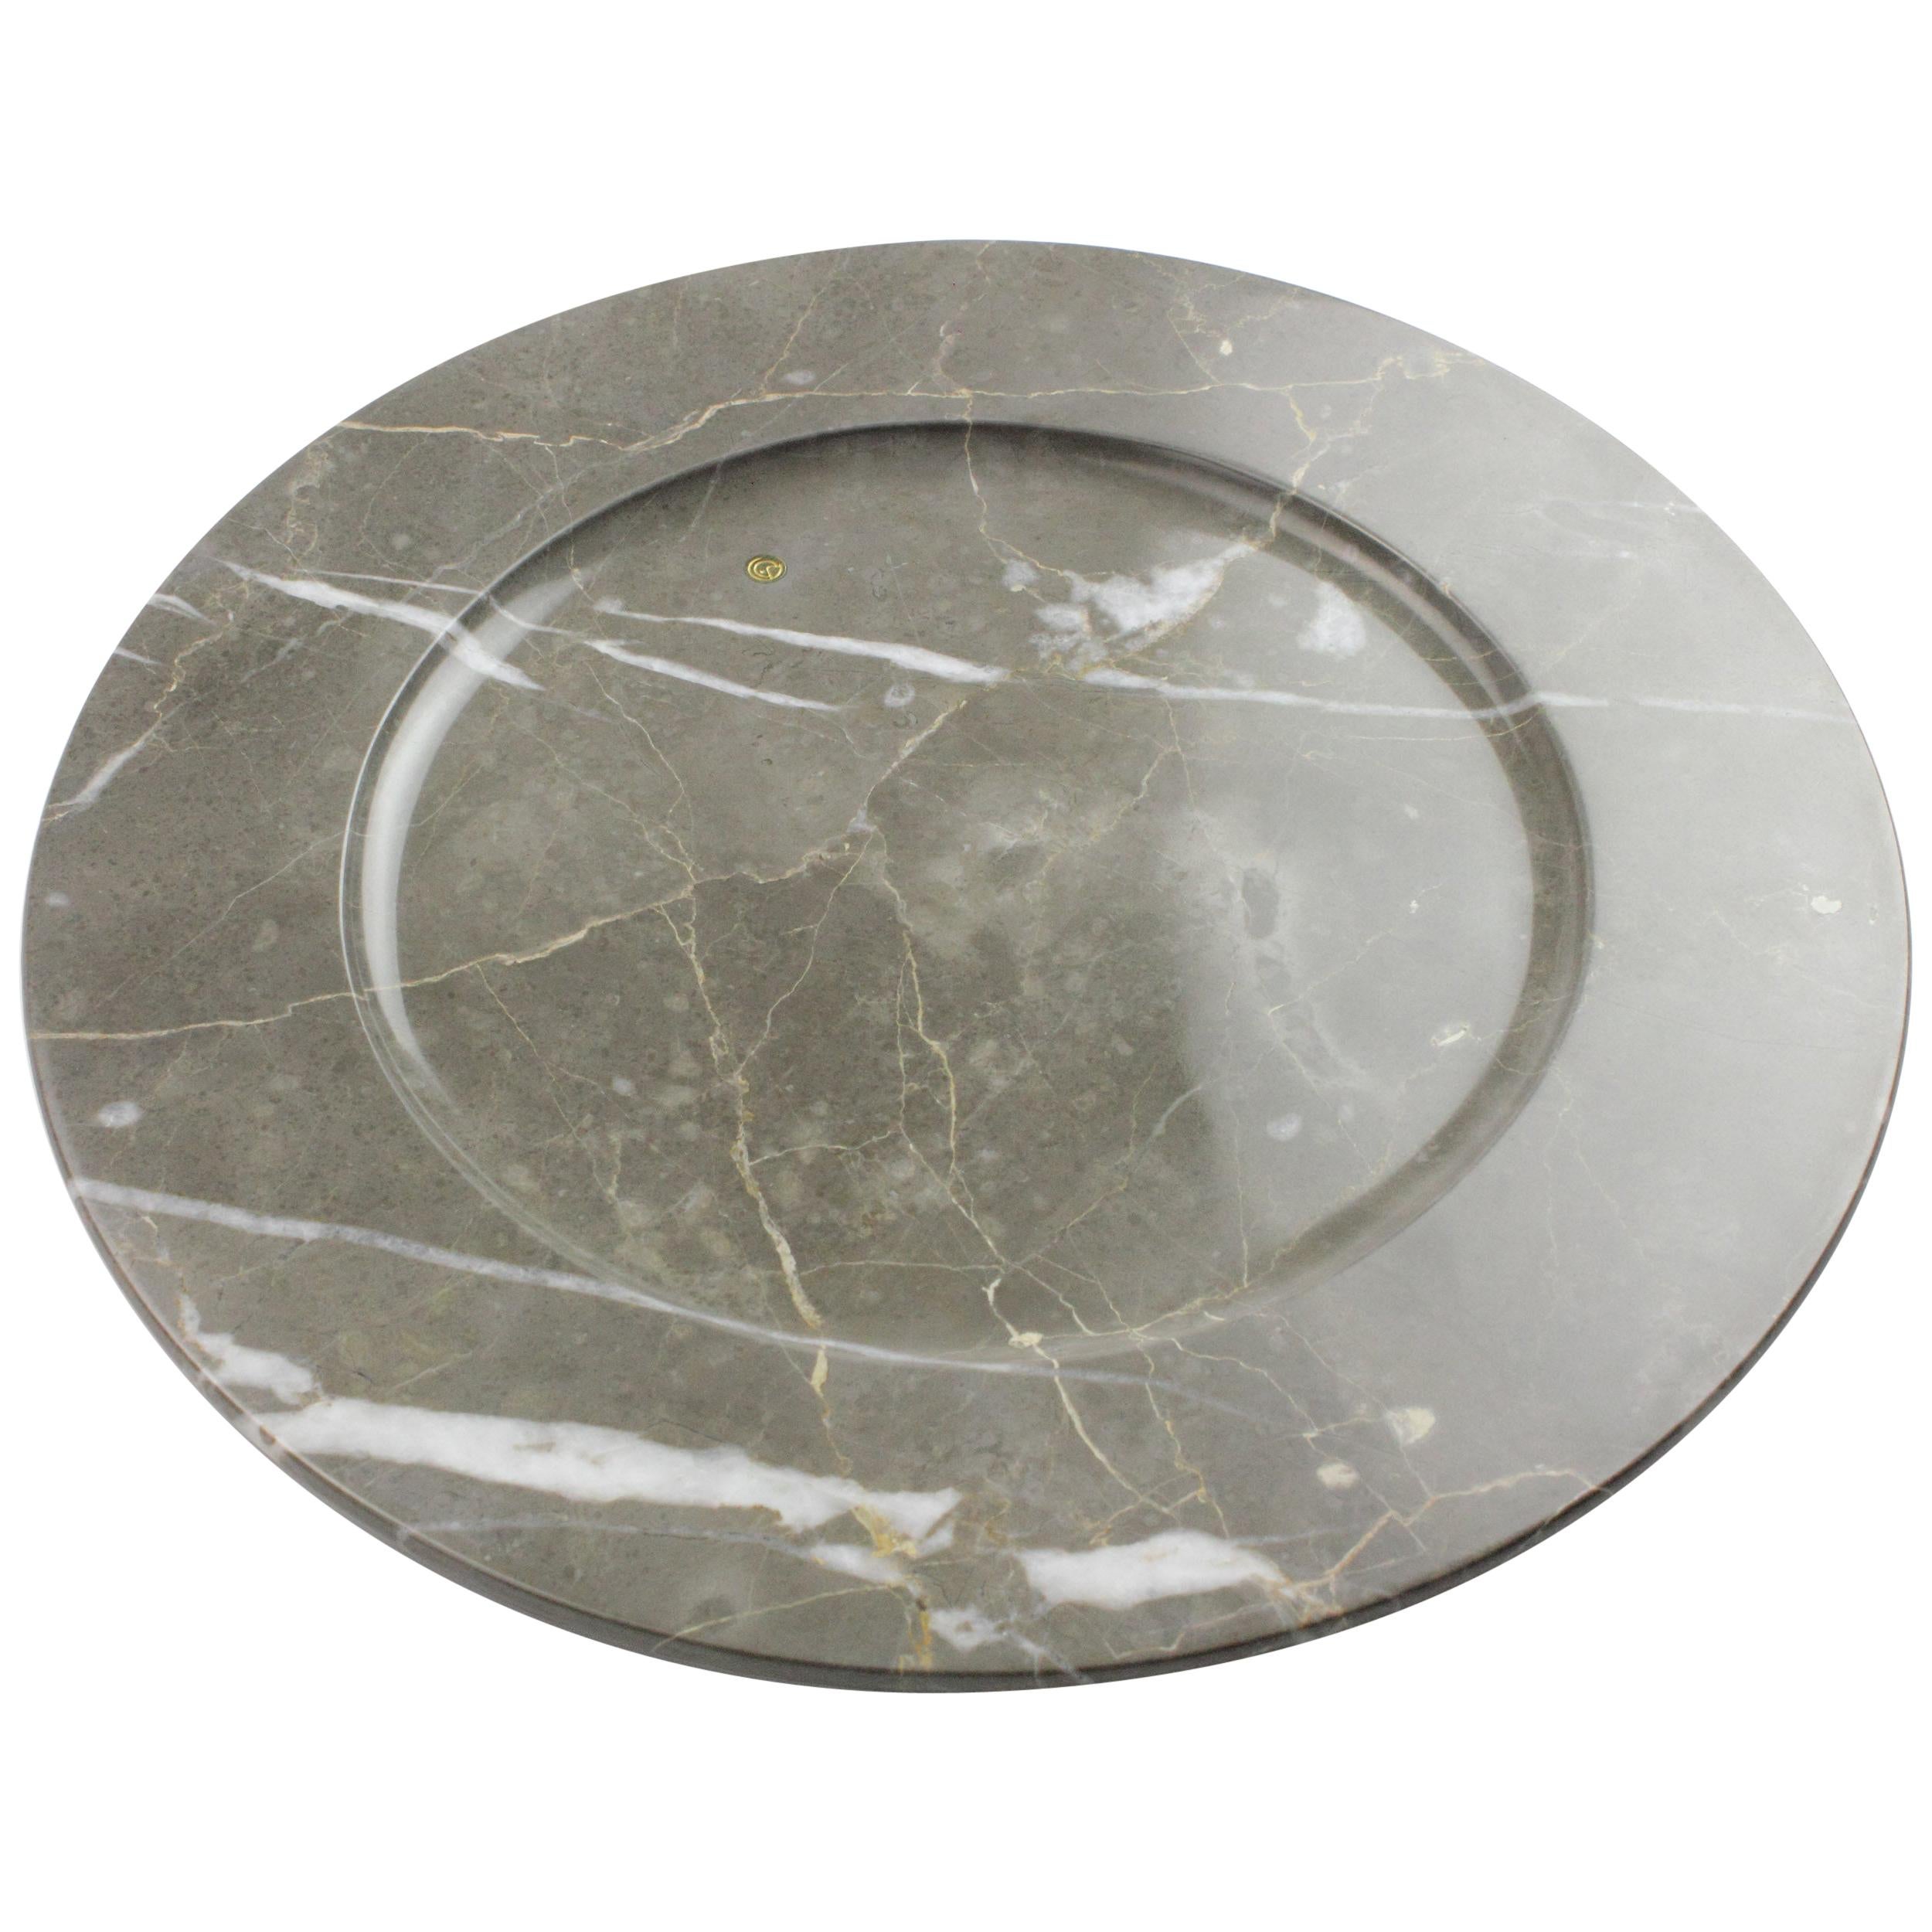 Charger Plate Platters Serveware Grey Marble Handmade Italy Collectible Design